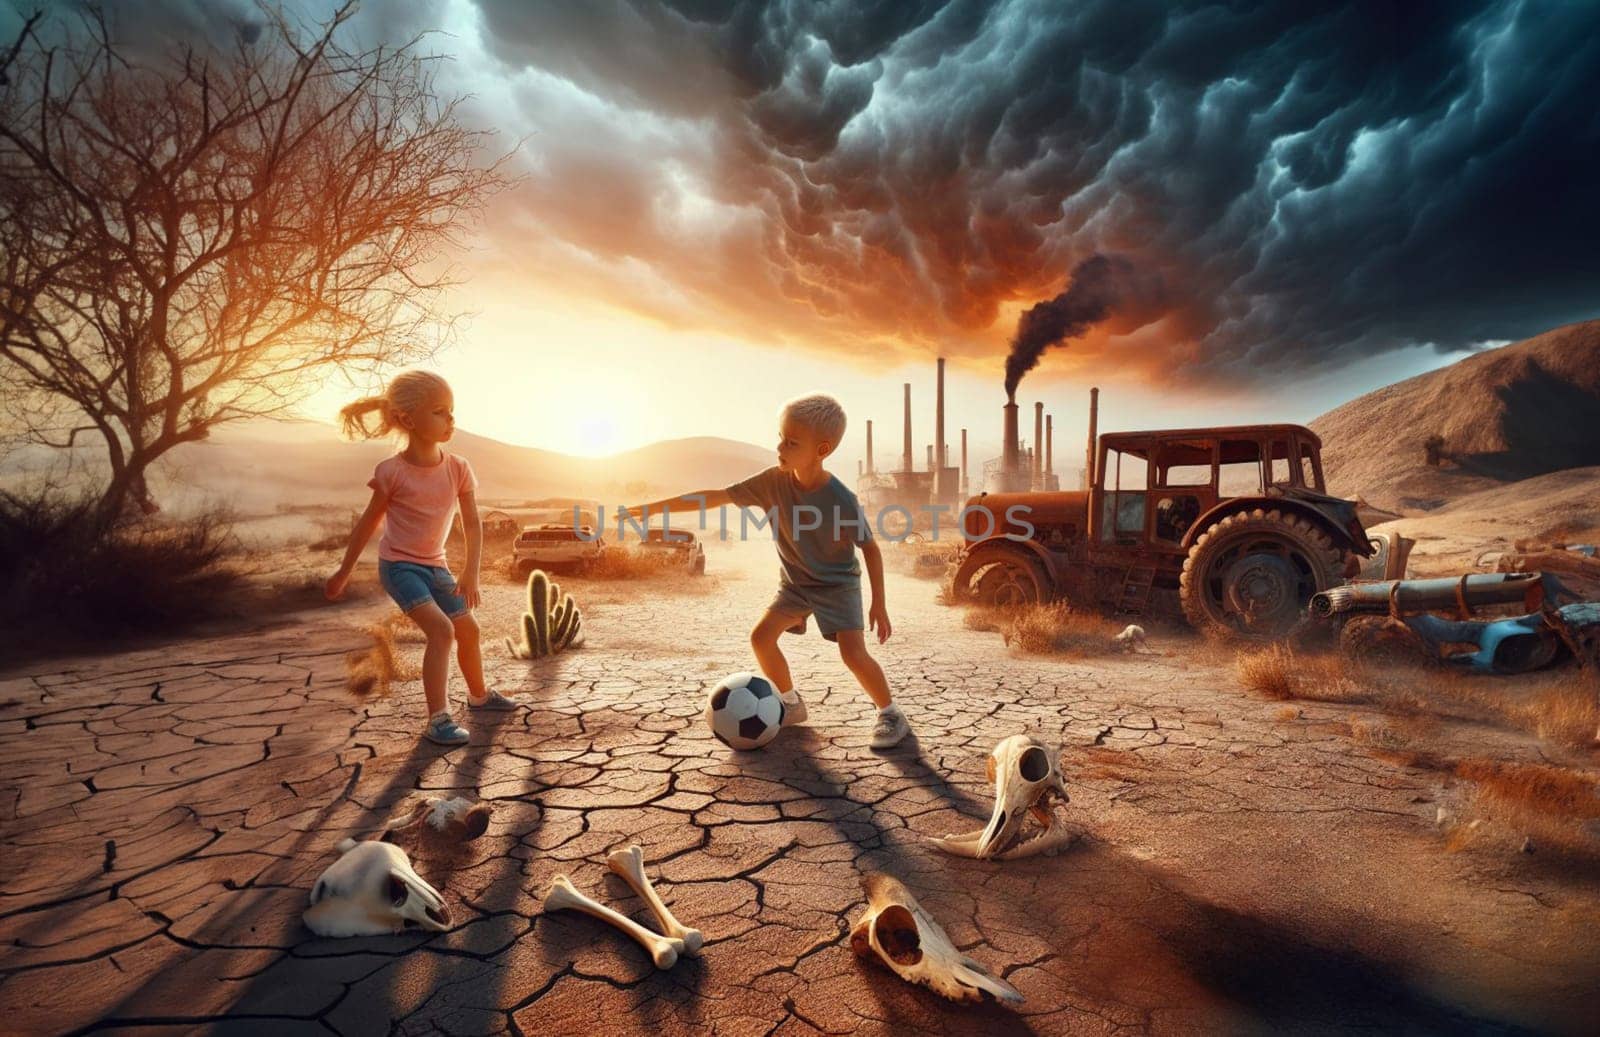 Children playing ball in dystopian scene, Scorched earth arid soil desert heat sun climate change global warming drought, abandoned unfertile land,apocalyptic scene, ai generated